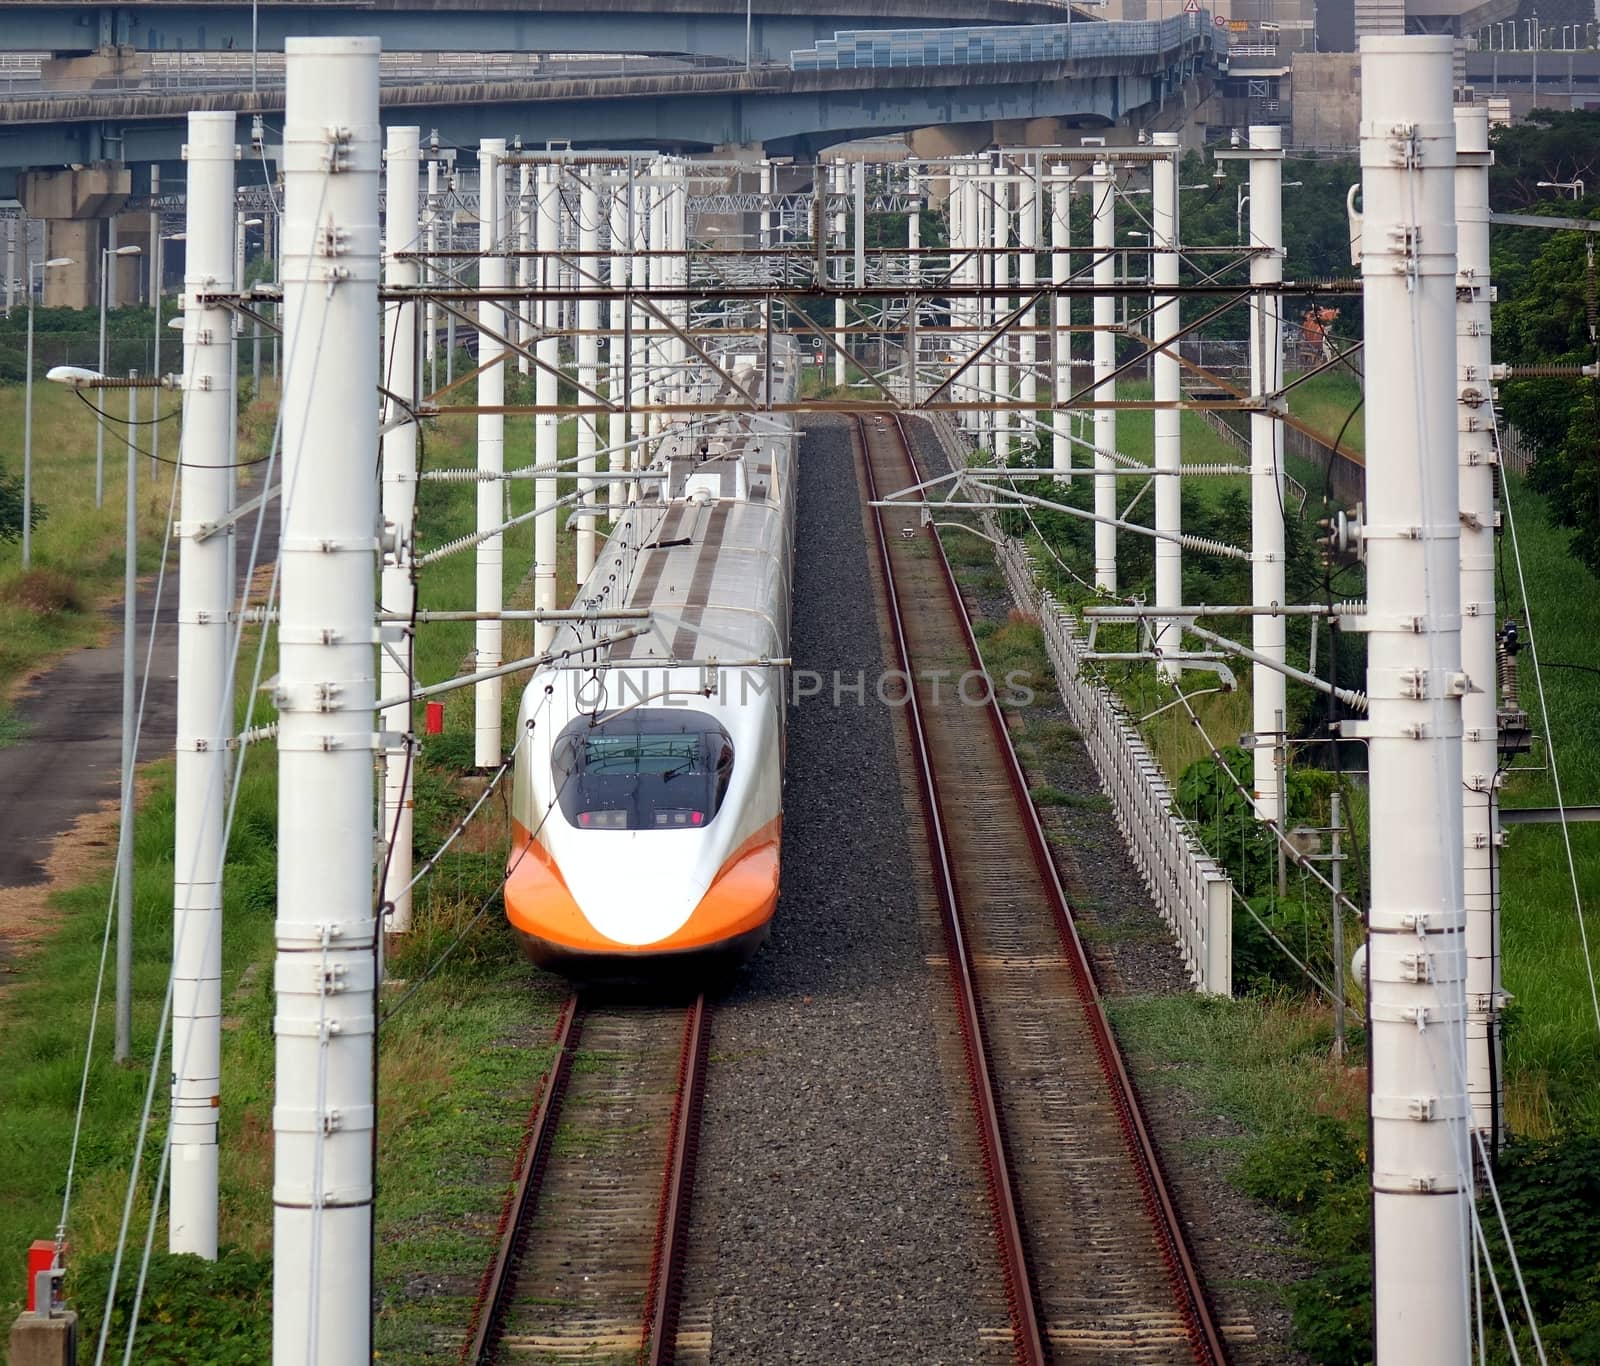 KAOHSIUNG, TAIWAN -- OCTOBER 17, 2015: A modern bullet train of the Taiwan High Speed Railway Corporation sits on its tracks.
